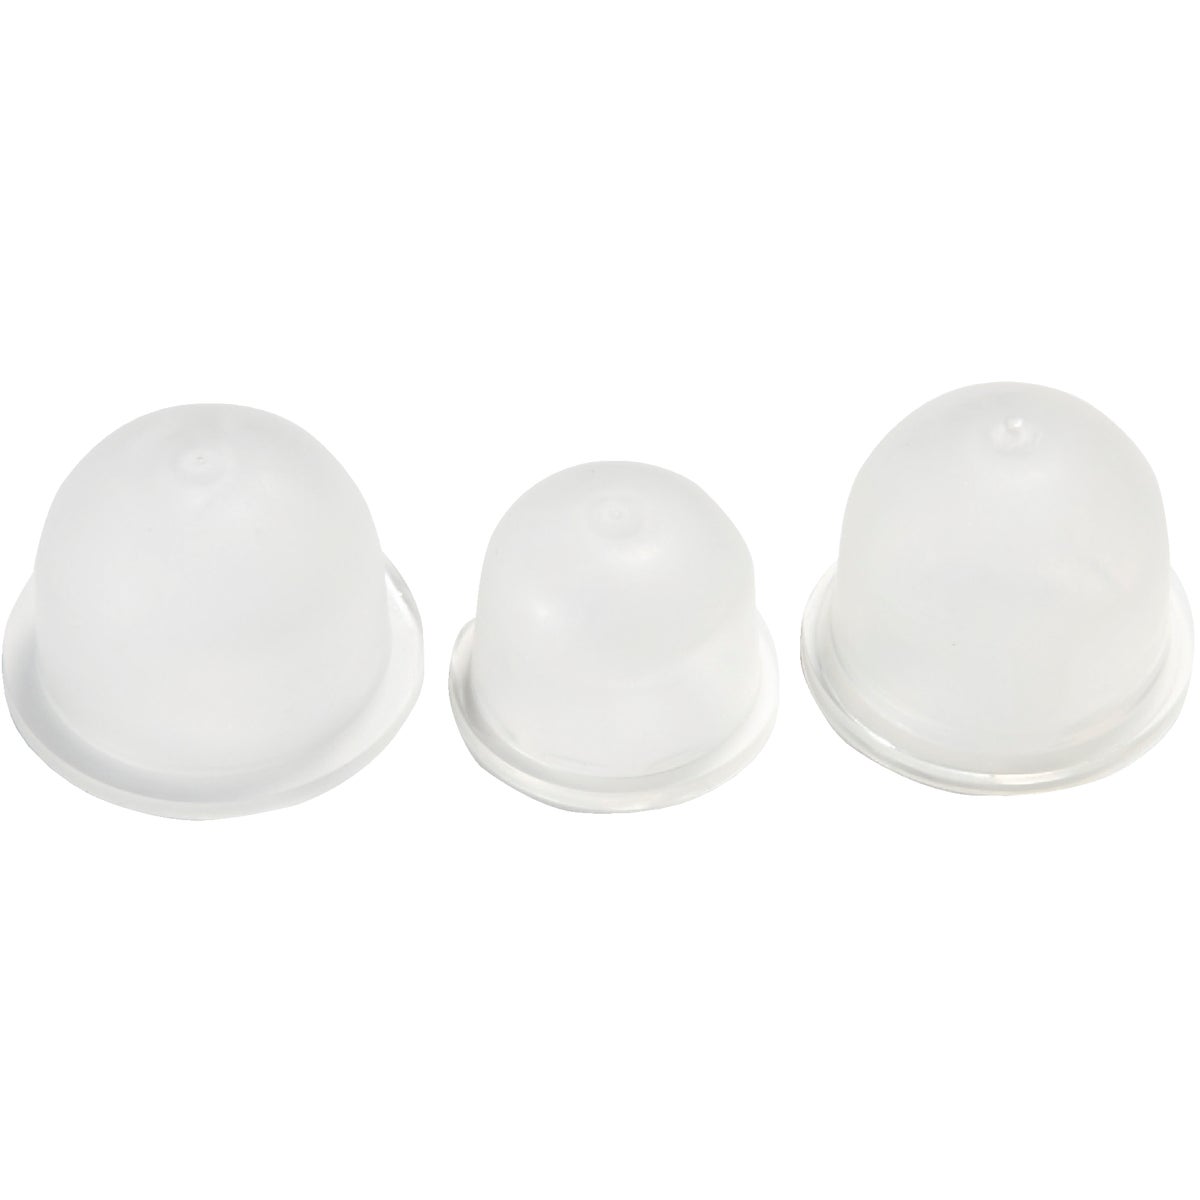 Item 767989, 2-cycle/4-cycle primer bulbs for handheld outdoor power equipment.